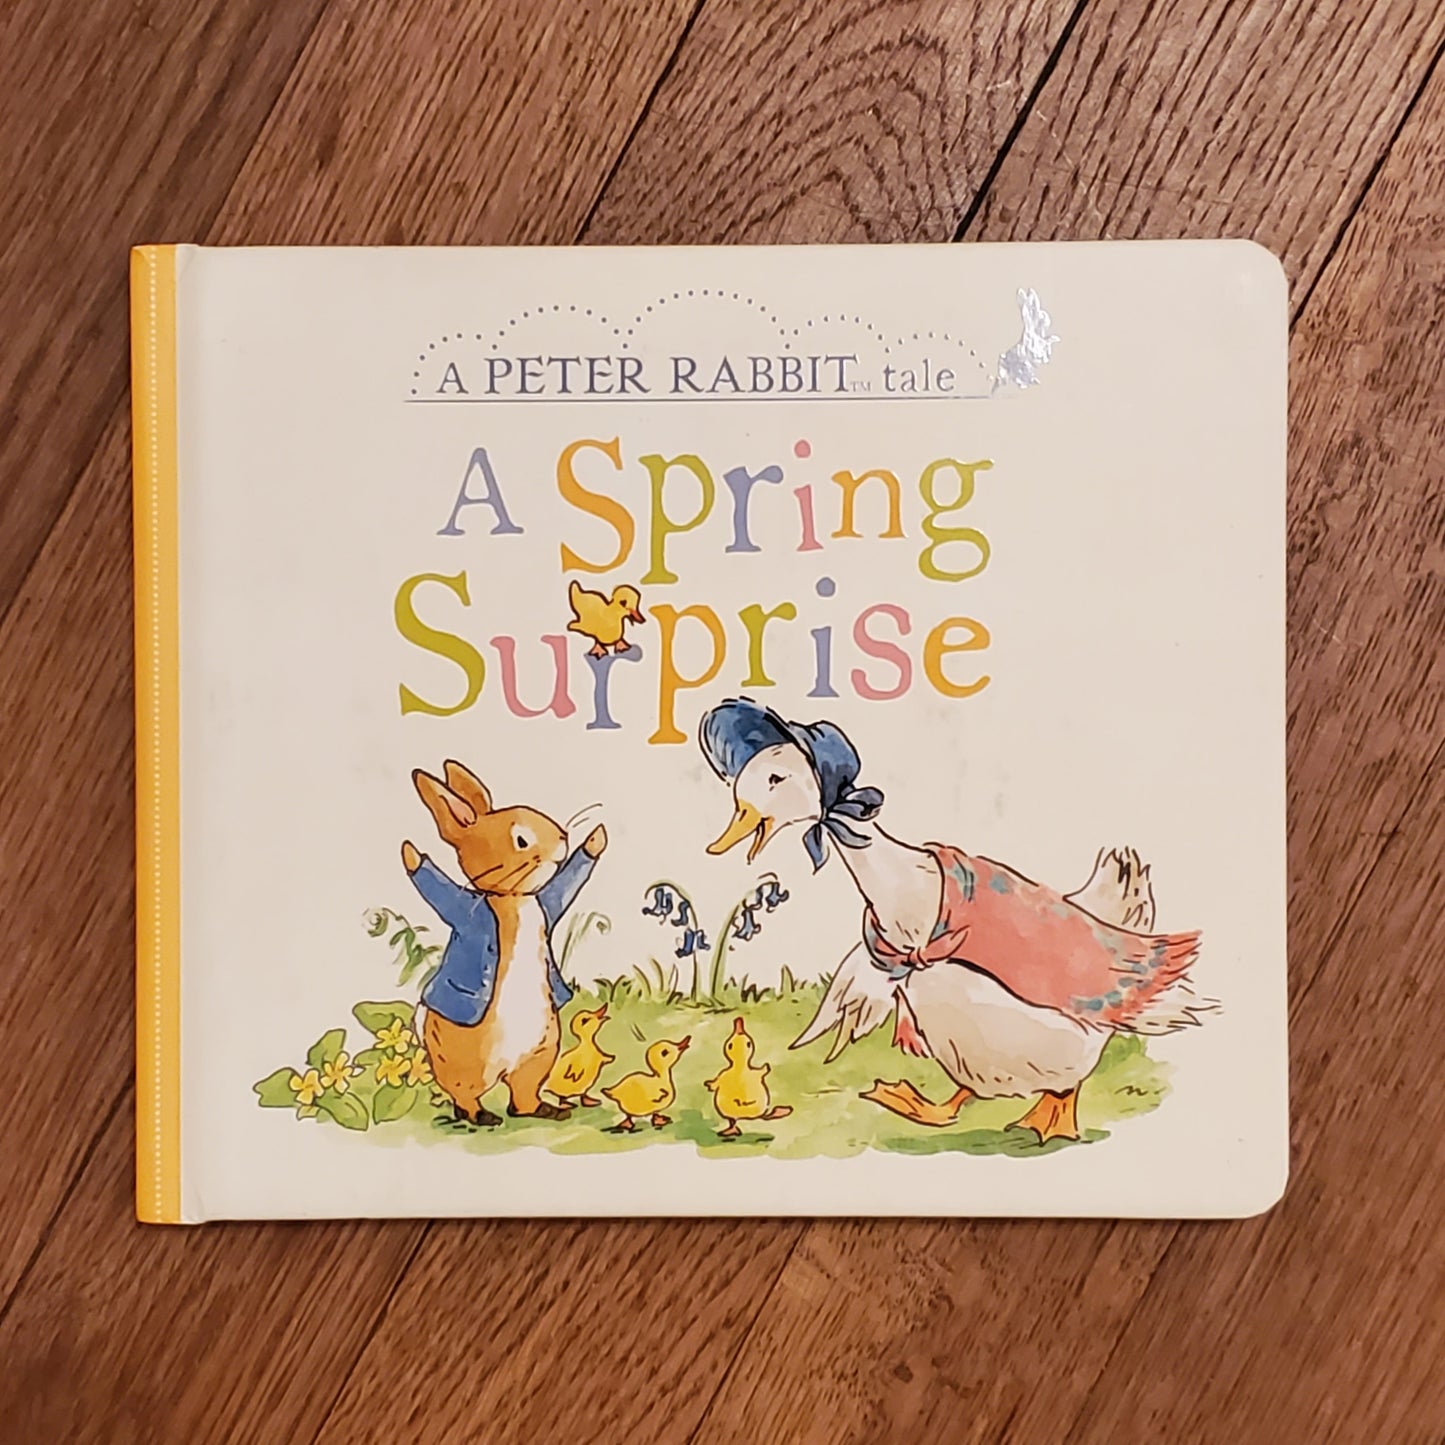 GB Board Book - A Spring Surprise: A Peter Rabbit Tale